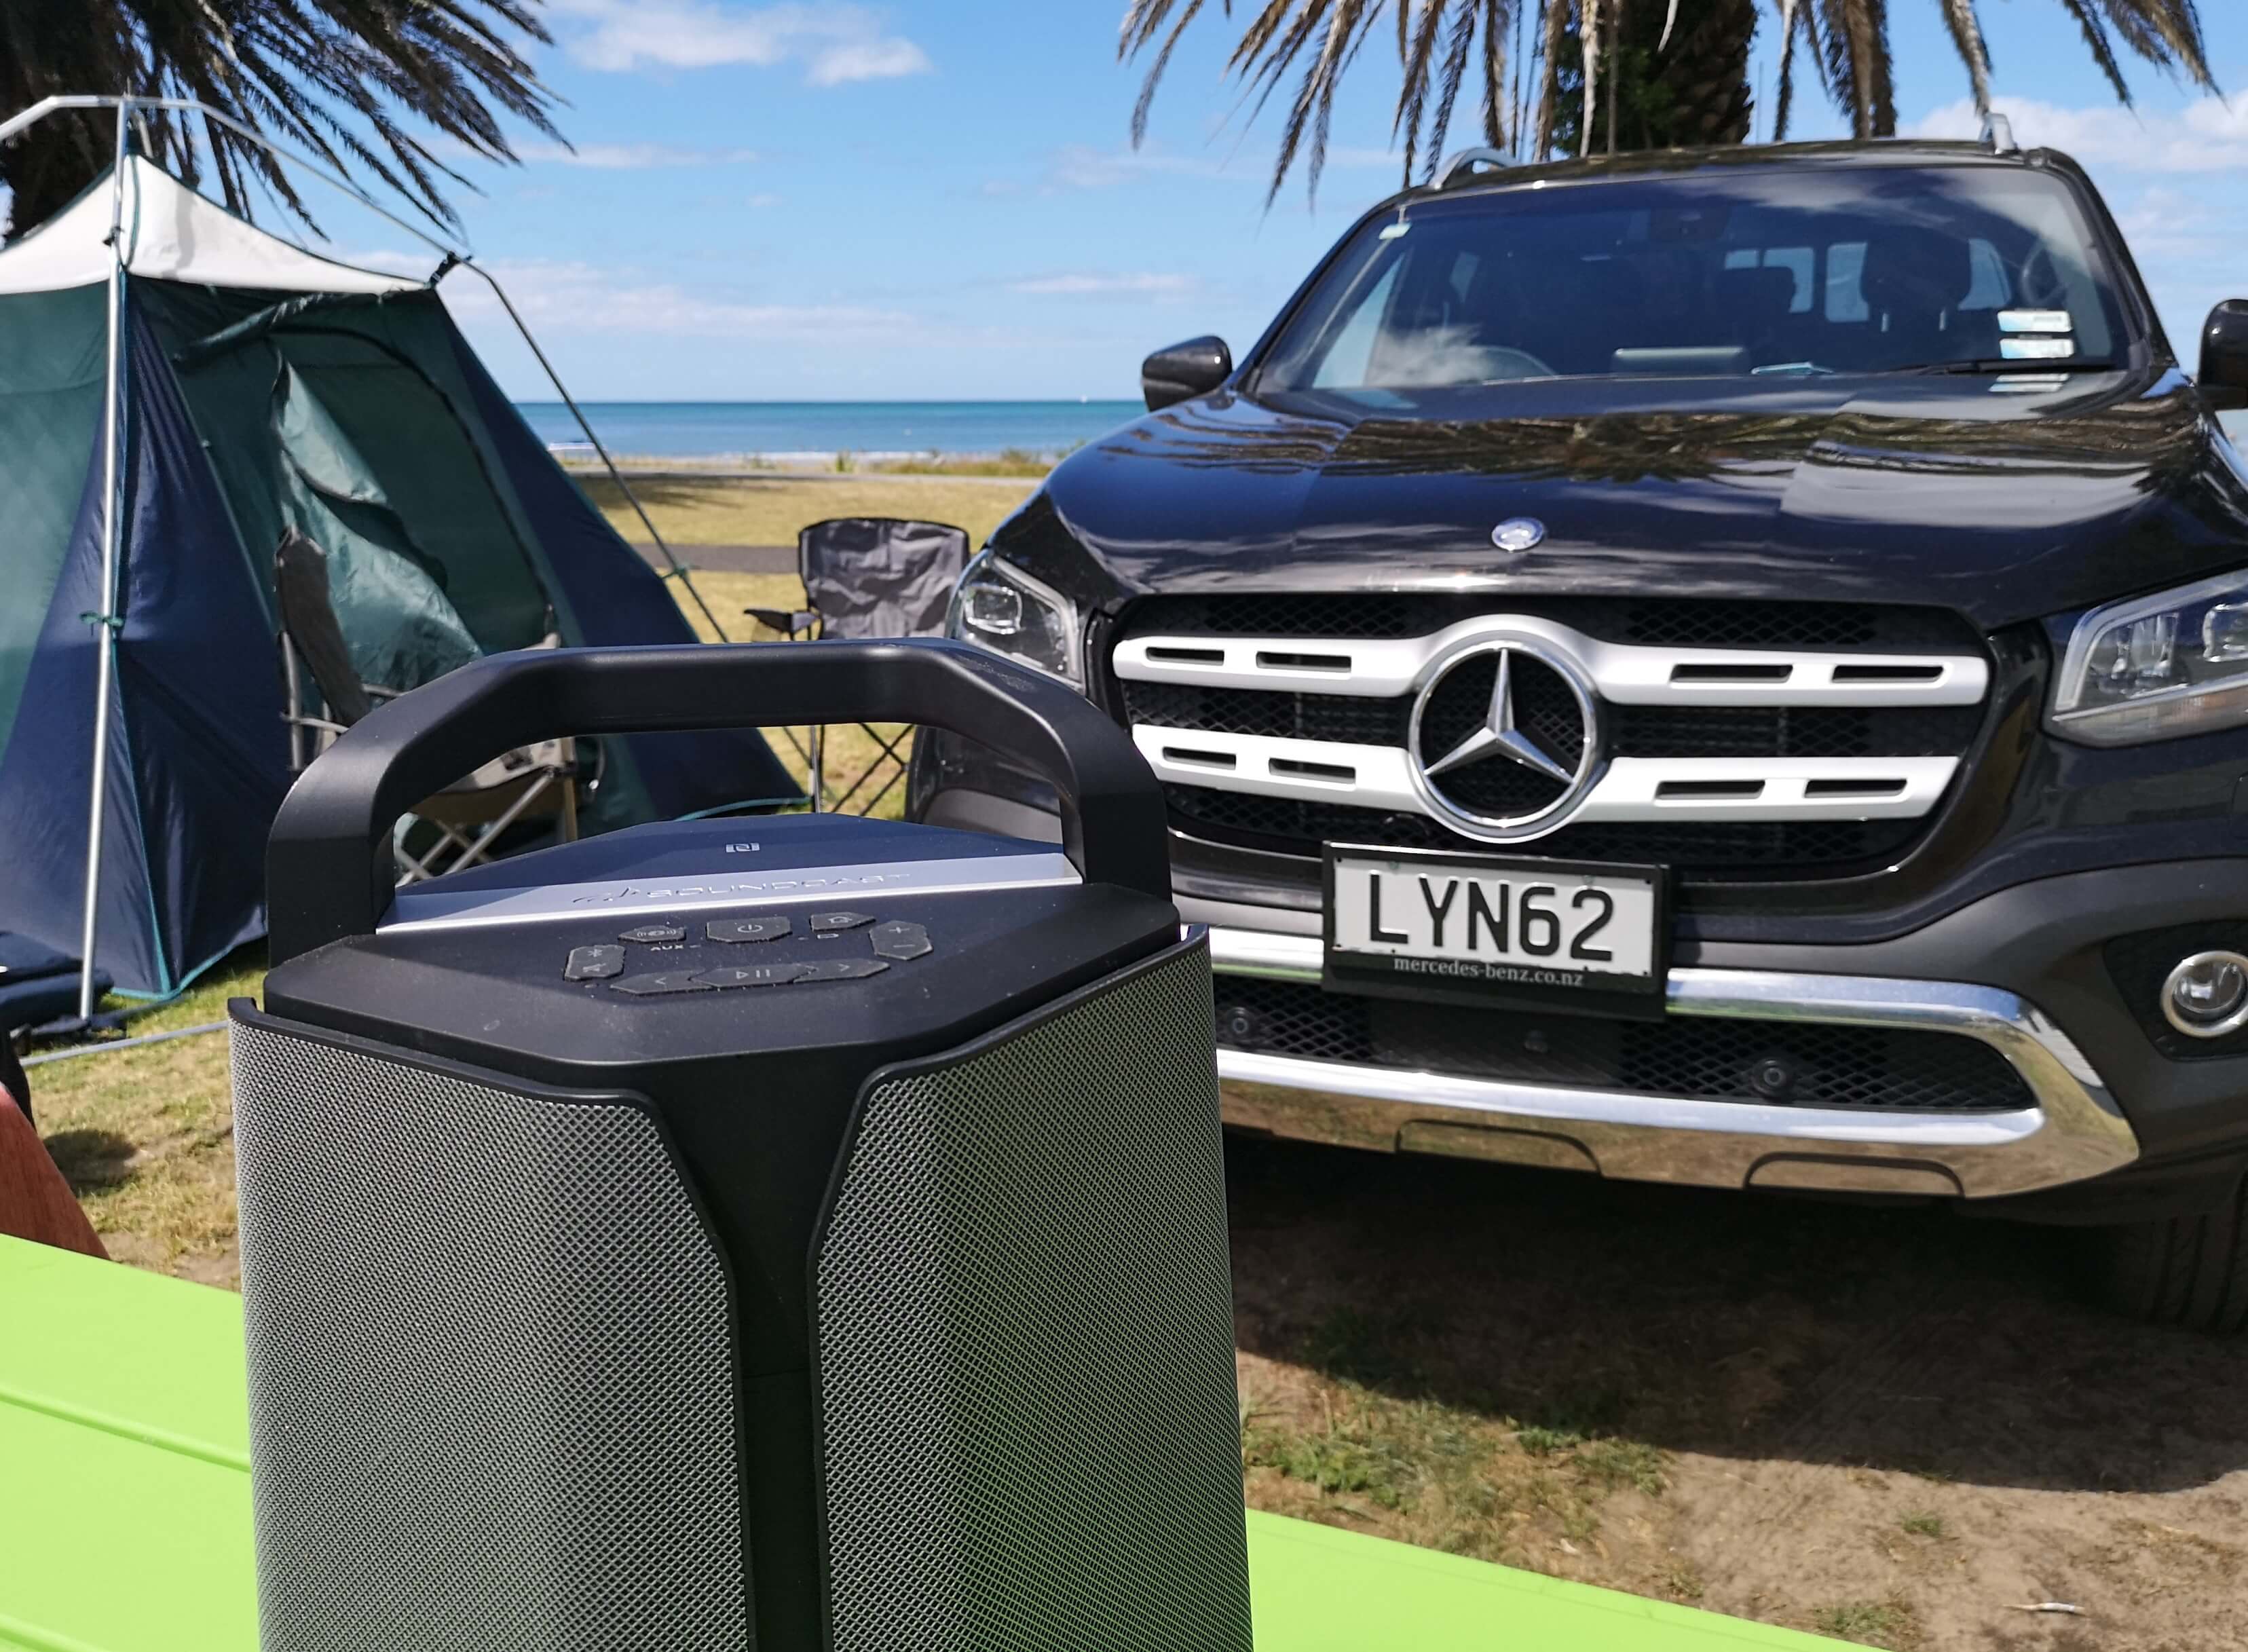 Soundcast VG7 with Mercedes X-Class